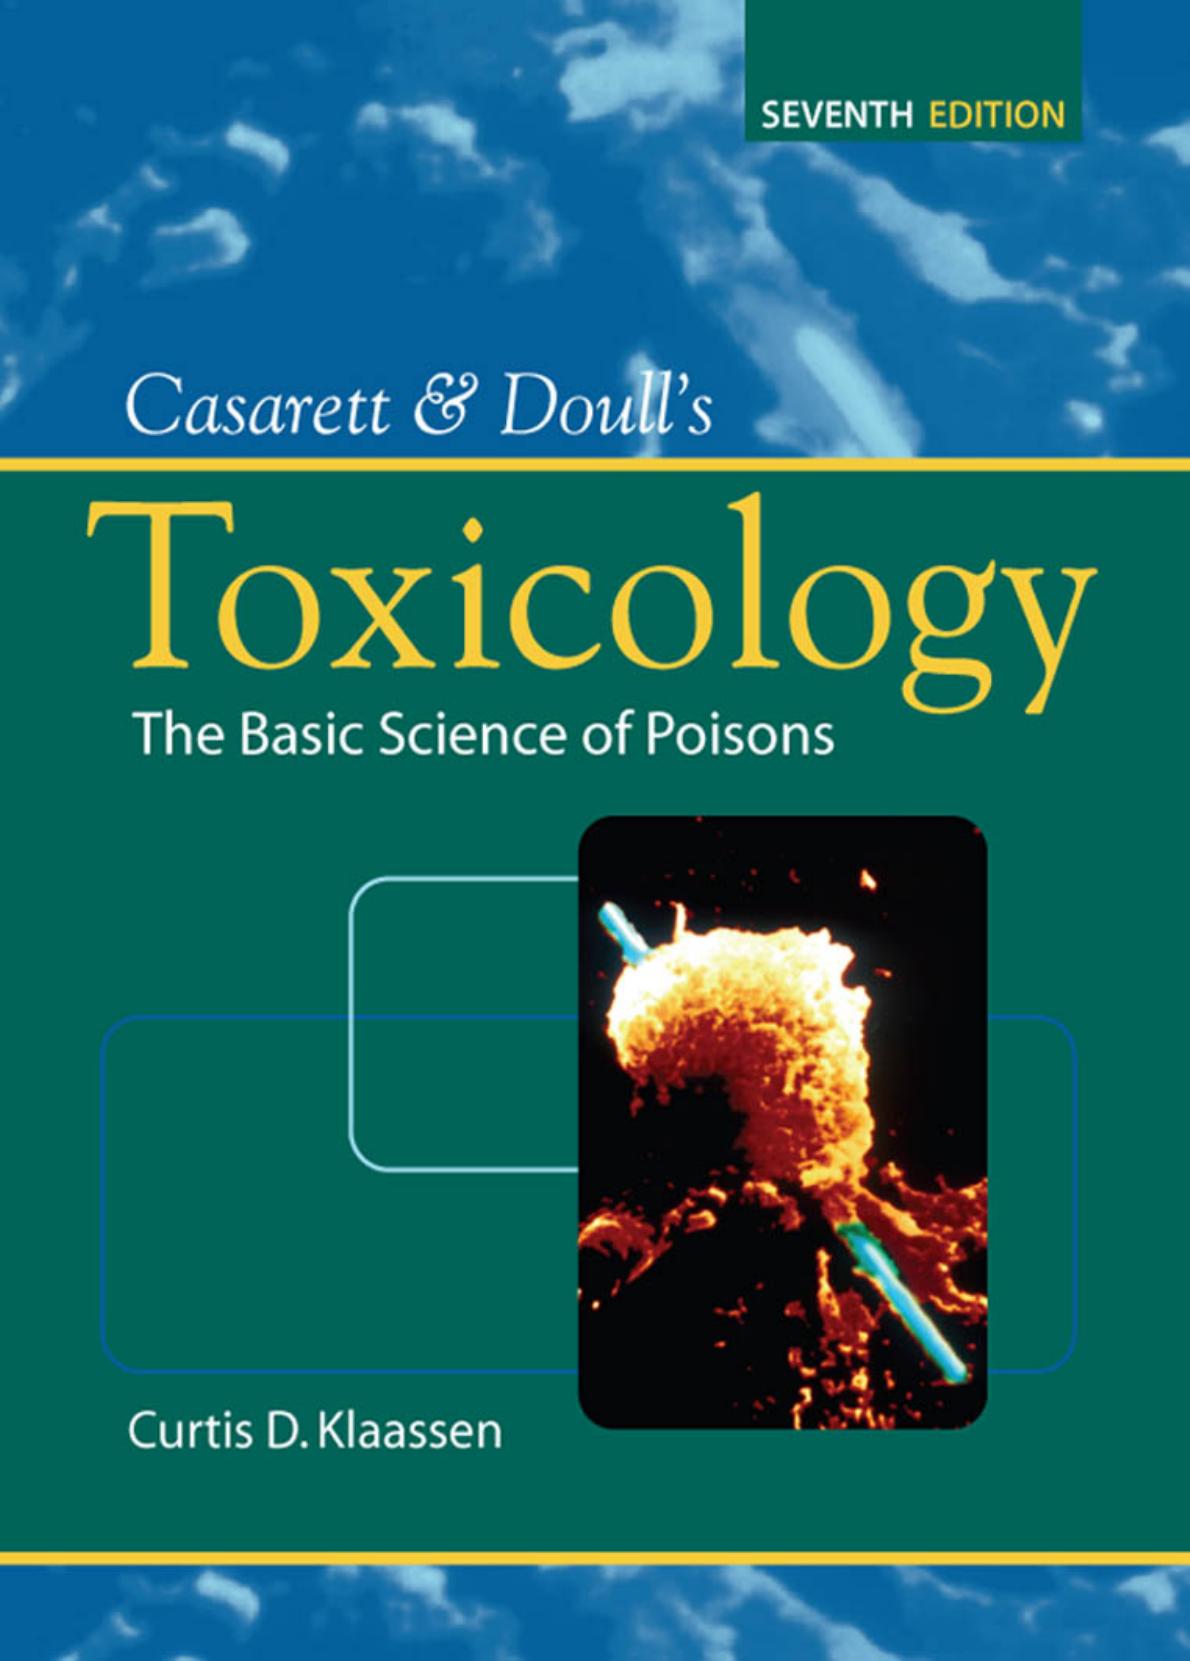 Casarett and Doull's Toxicology : The Basic Science of Poisons